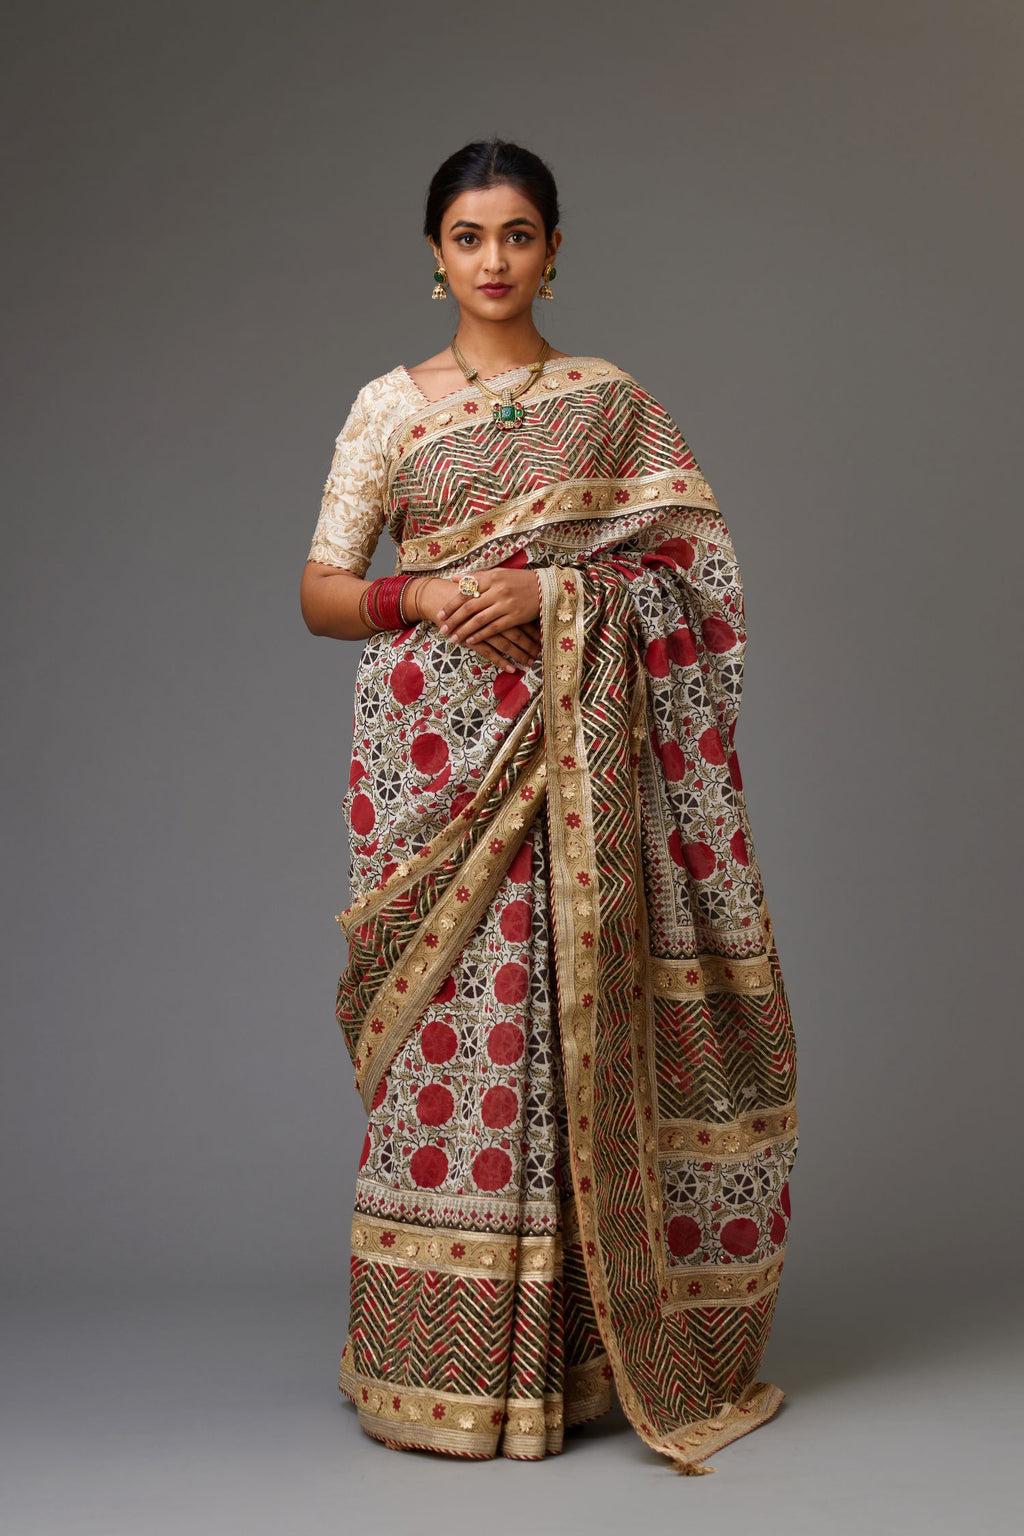 Silk chanderi red and off-white hand block printed saree set, Detailed with gota flowers and gold sequin work, paired with off white cotton chanderi fully embroidered choli.